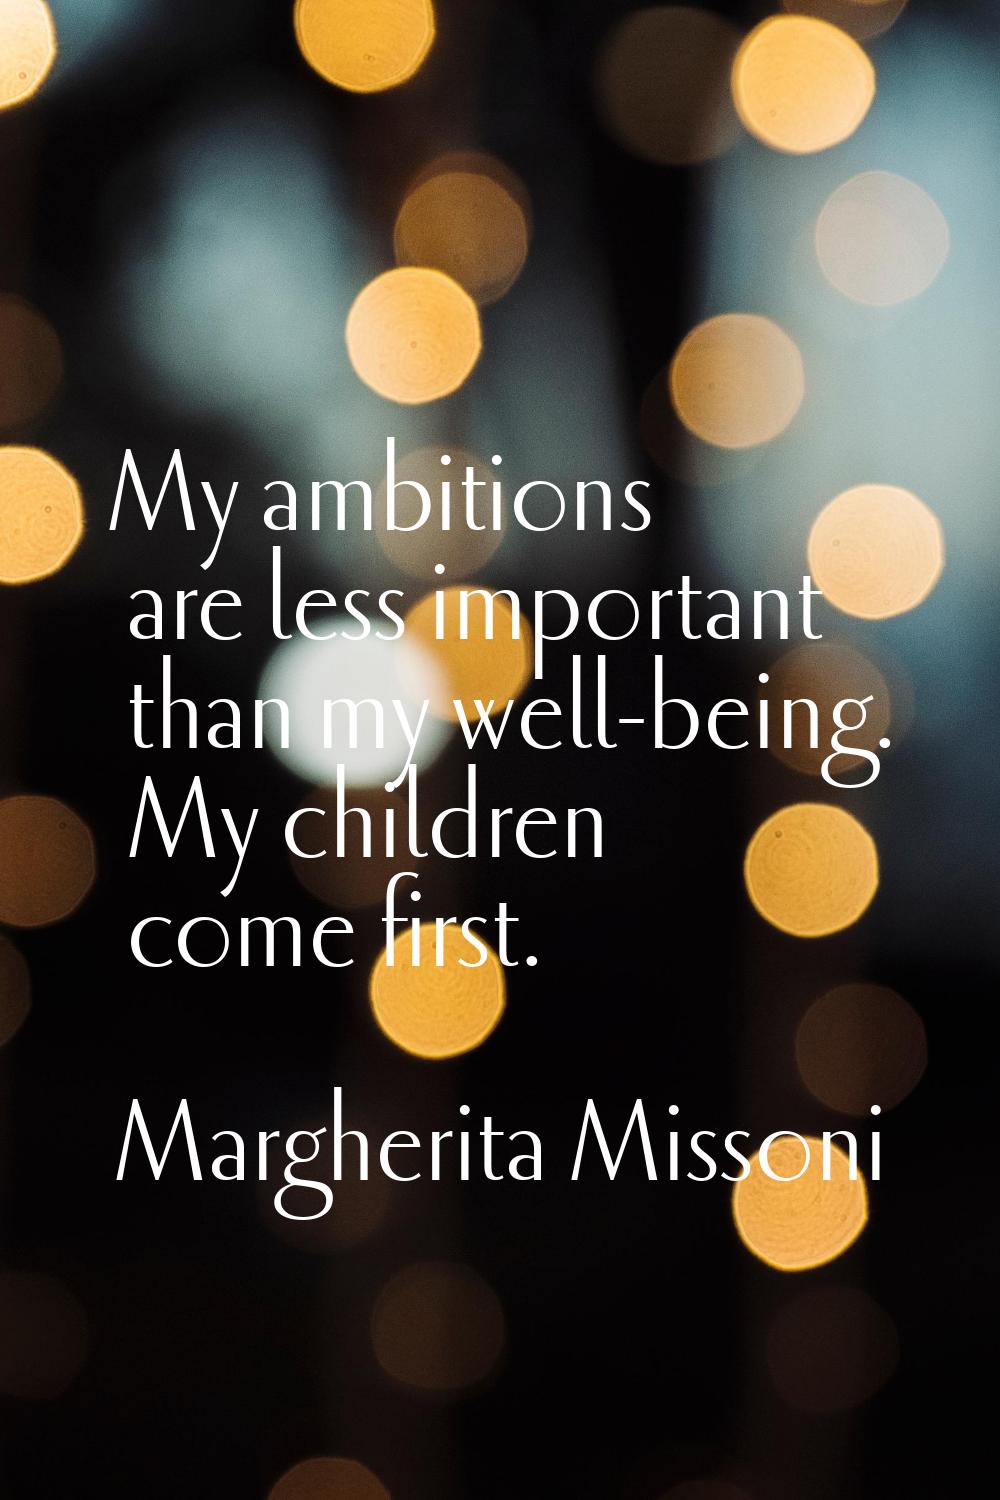 My ambitions are less important than my well-being. My children come first.